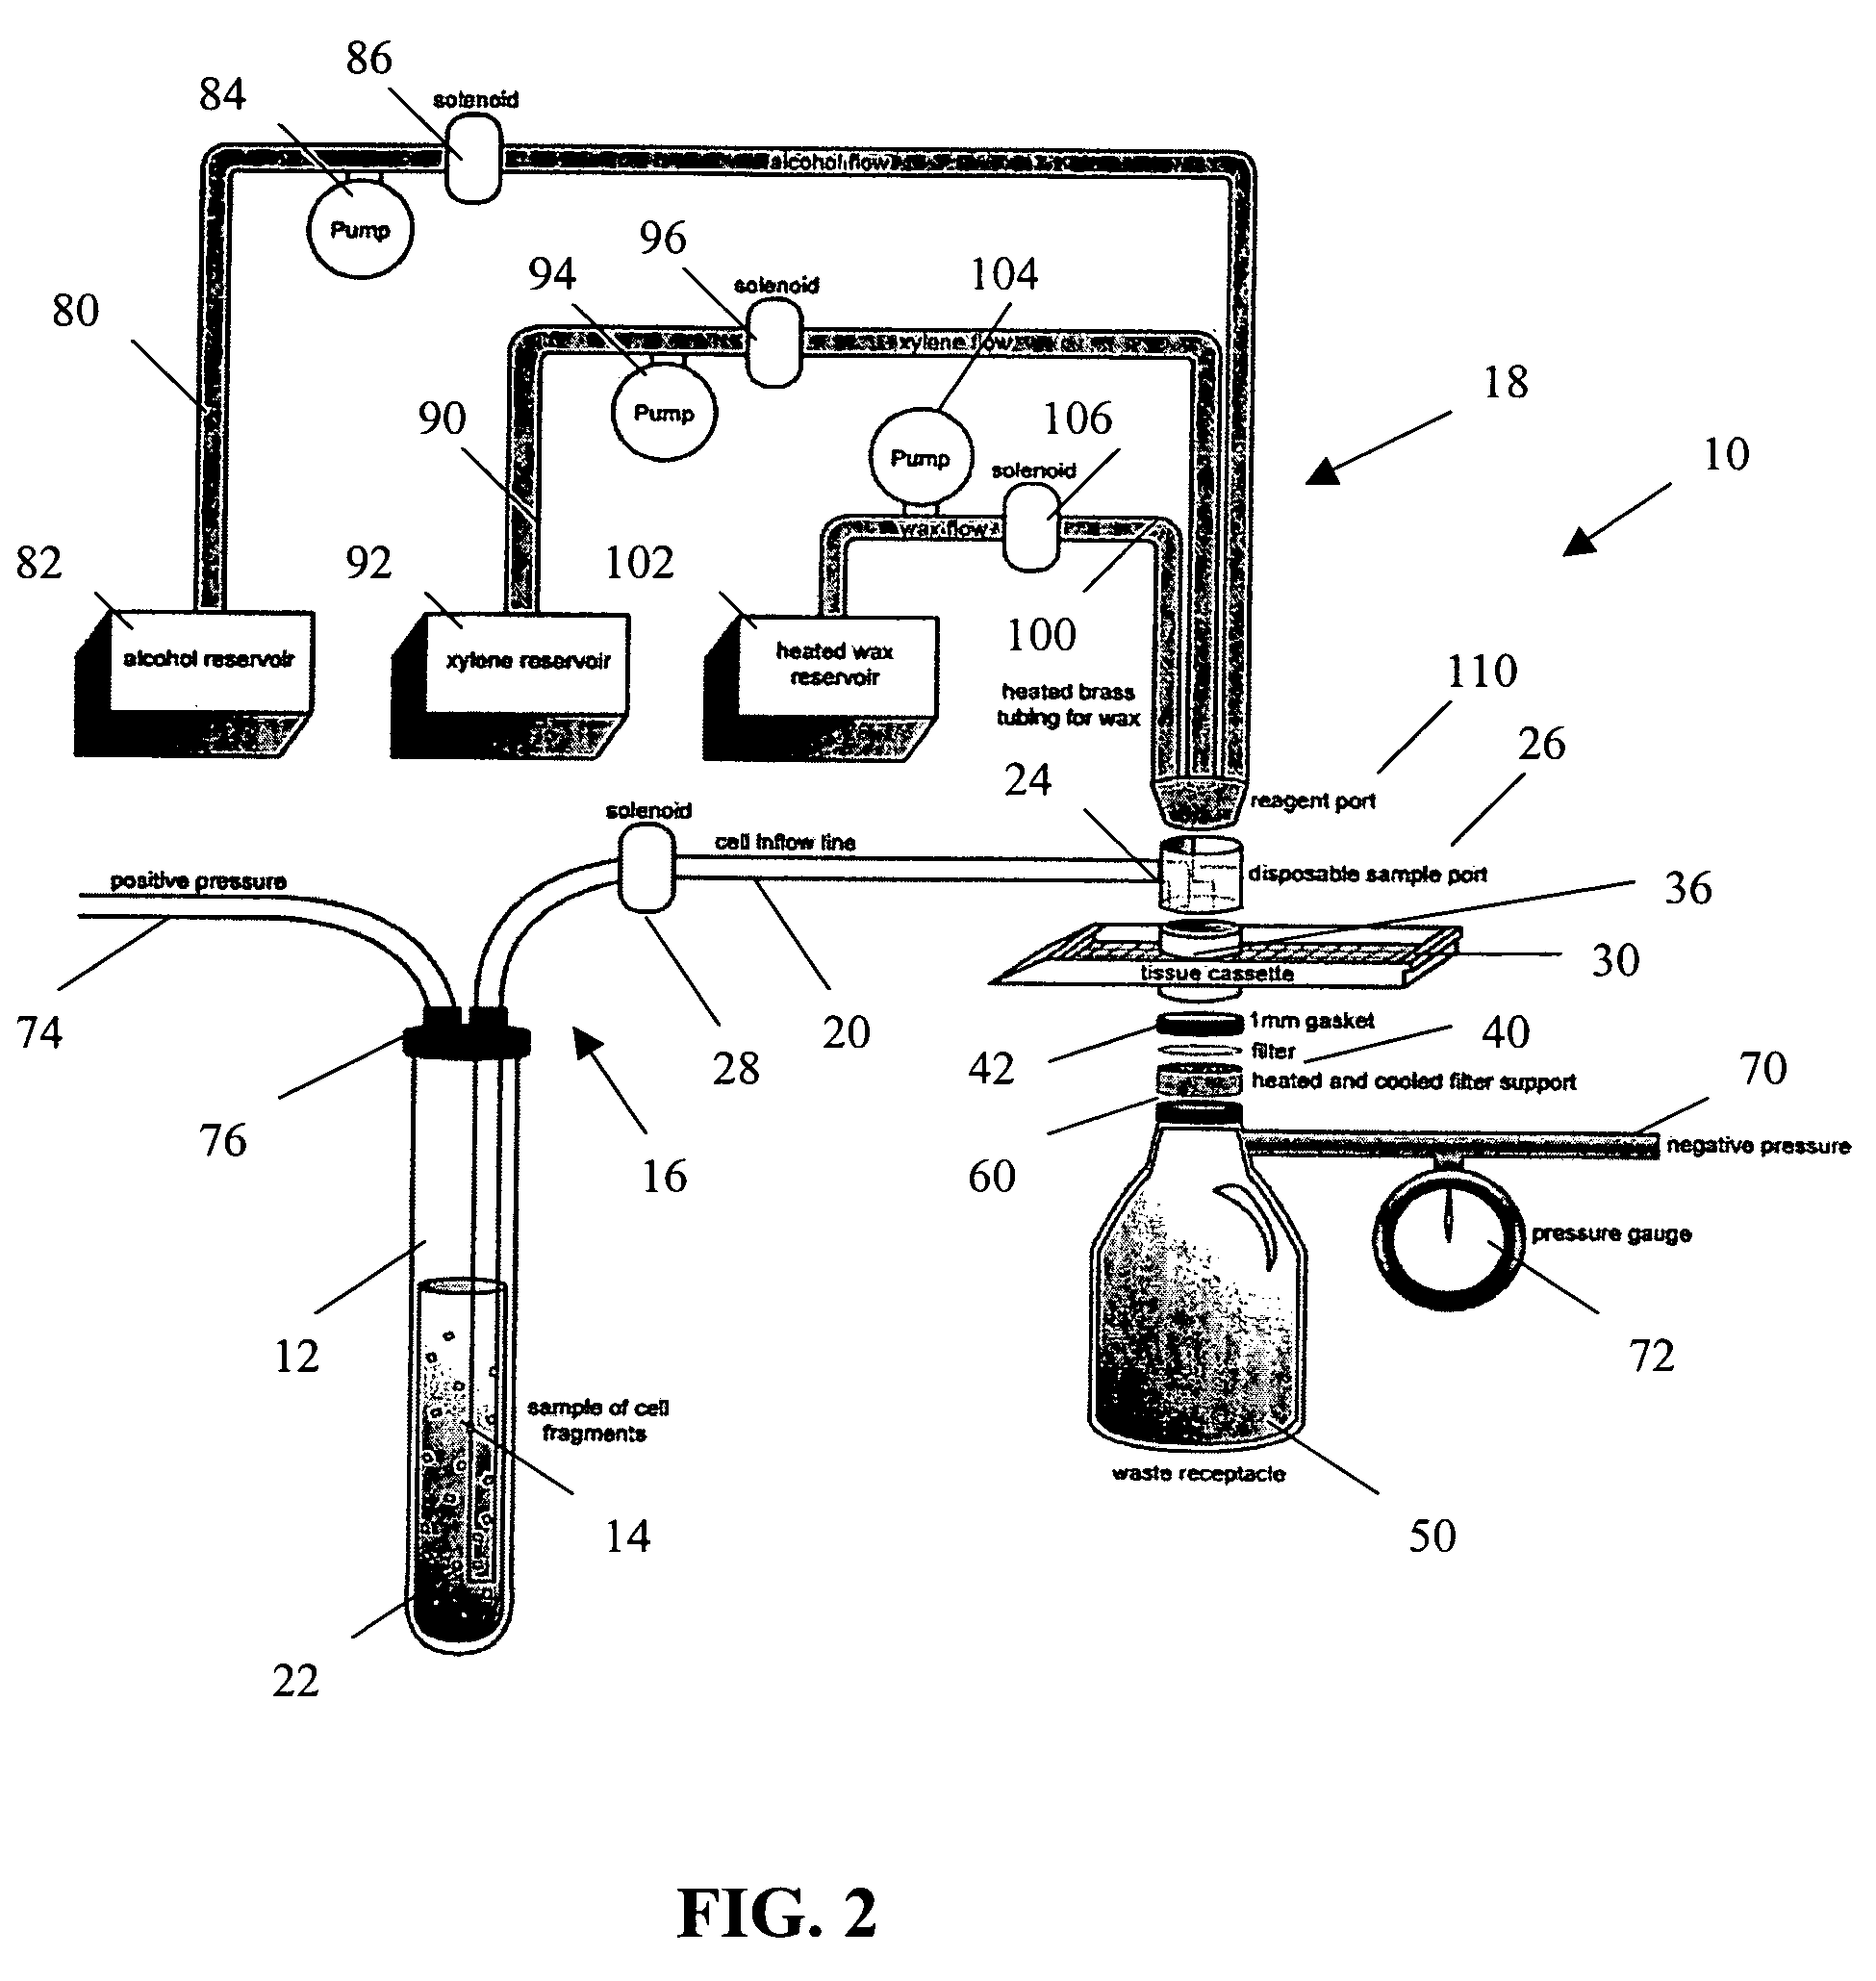 Method and apparatus for preparing cells for microtome sectioning and archiving nucleic acids and proteins